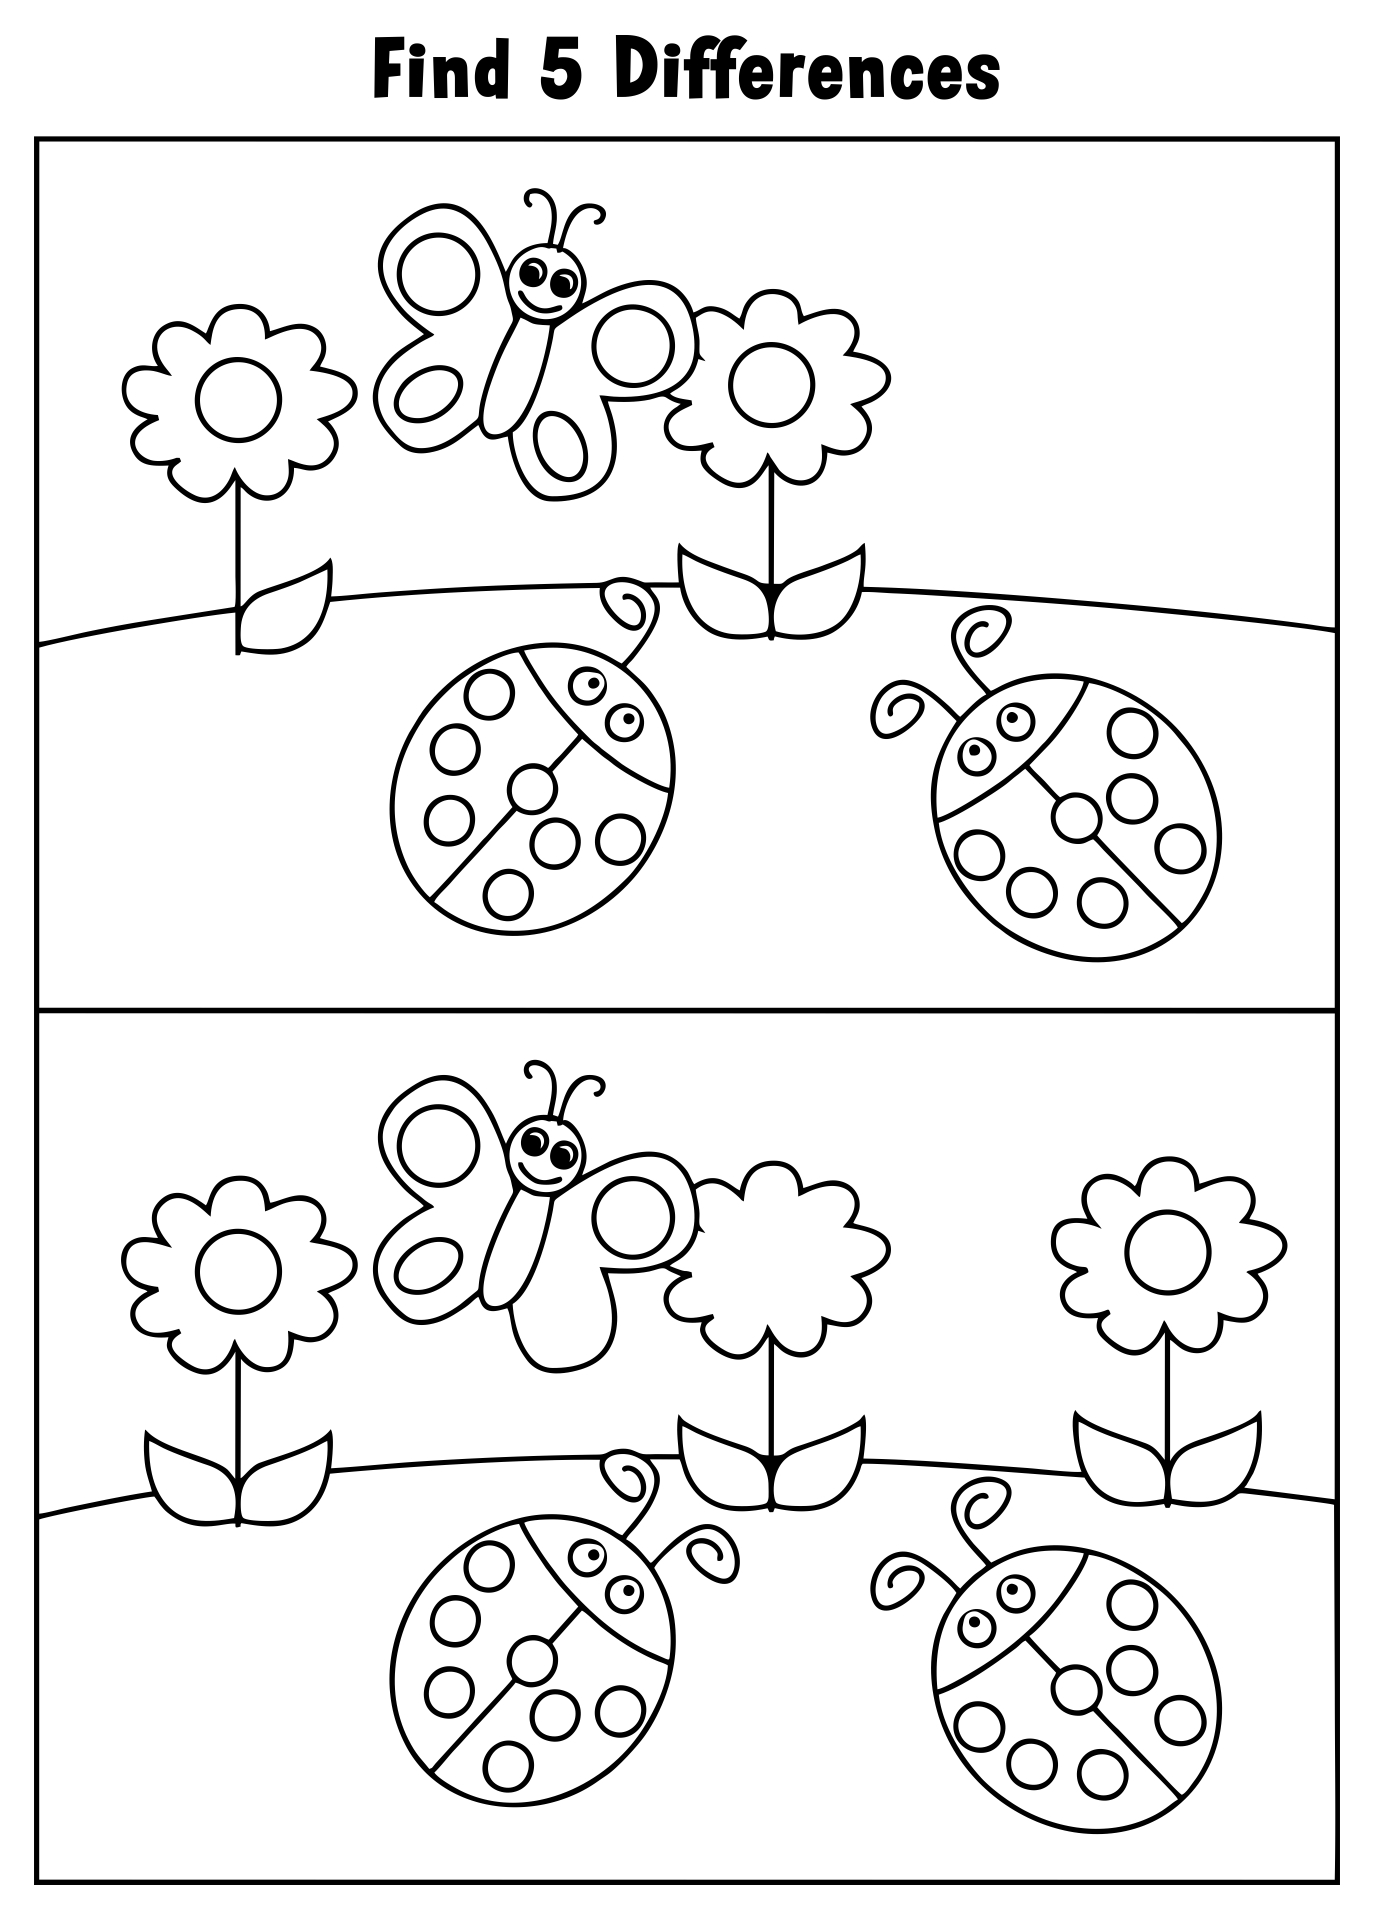 spot-the-difference-coloring-pages-download-and-print-for-free